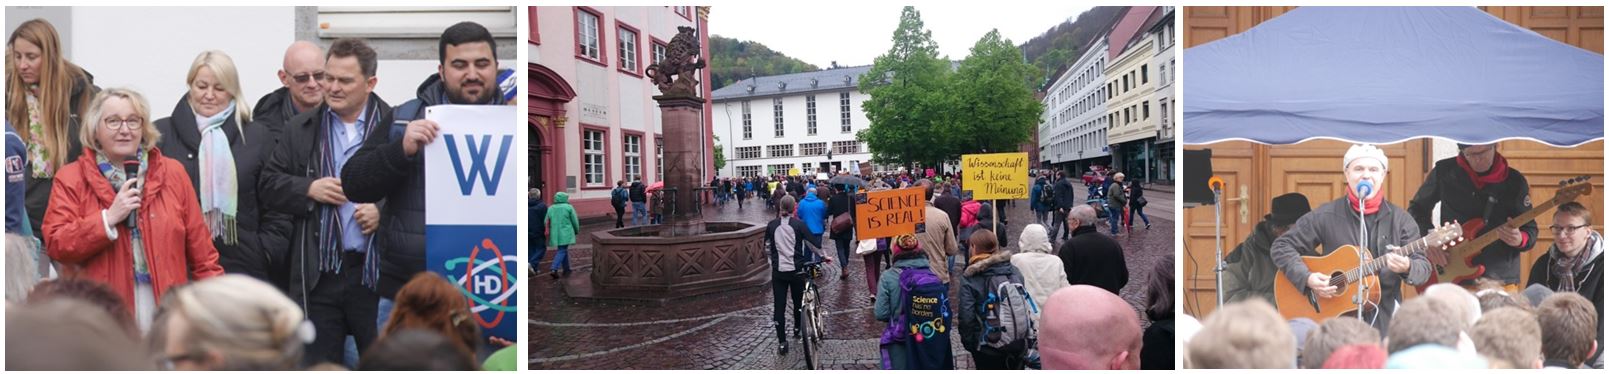 March for Science in Heidelberg